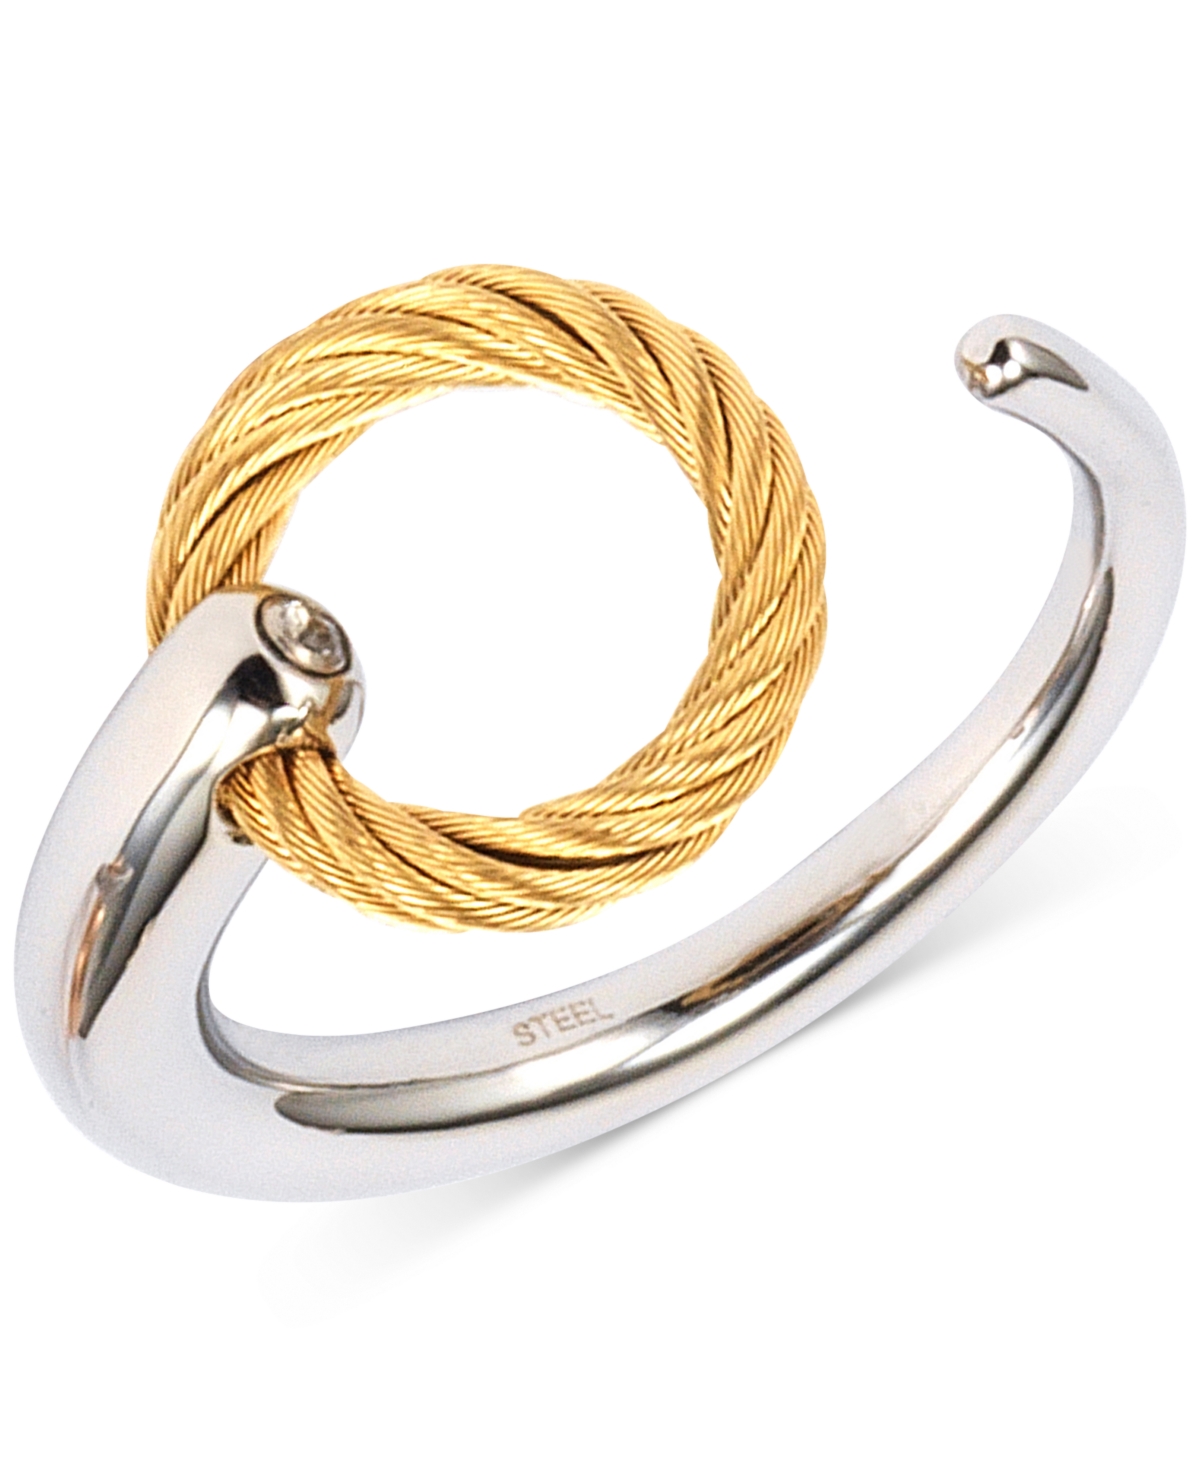 Charriol White Topaz Accent Cuff Ring in Stainless Steel & Gold-Tone Pvd Stainless Steel